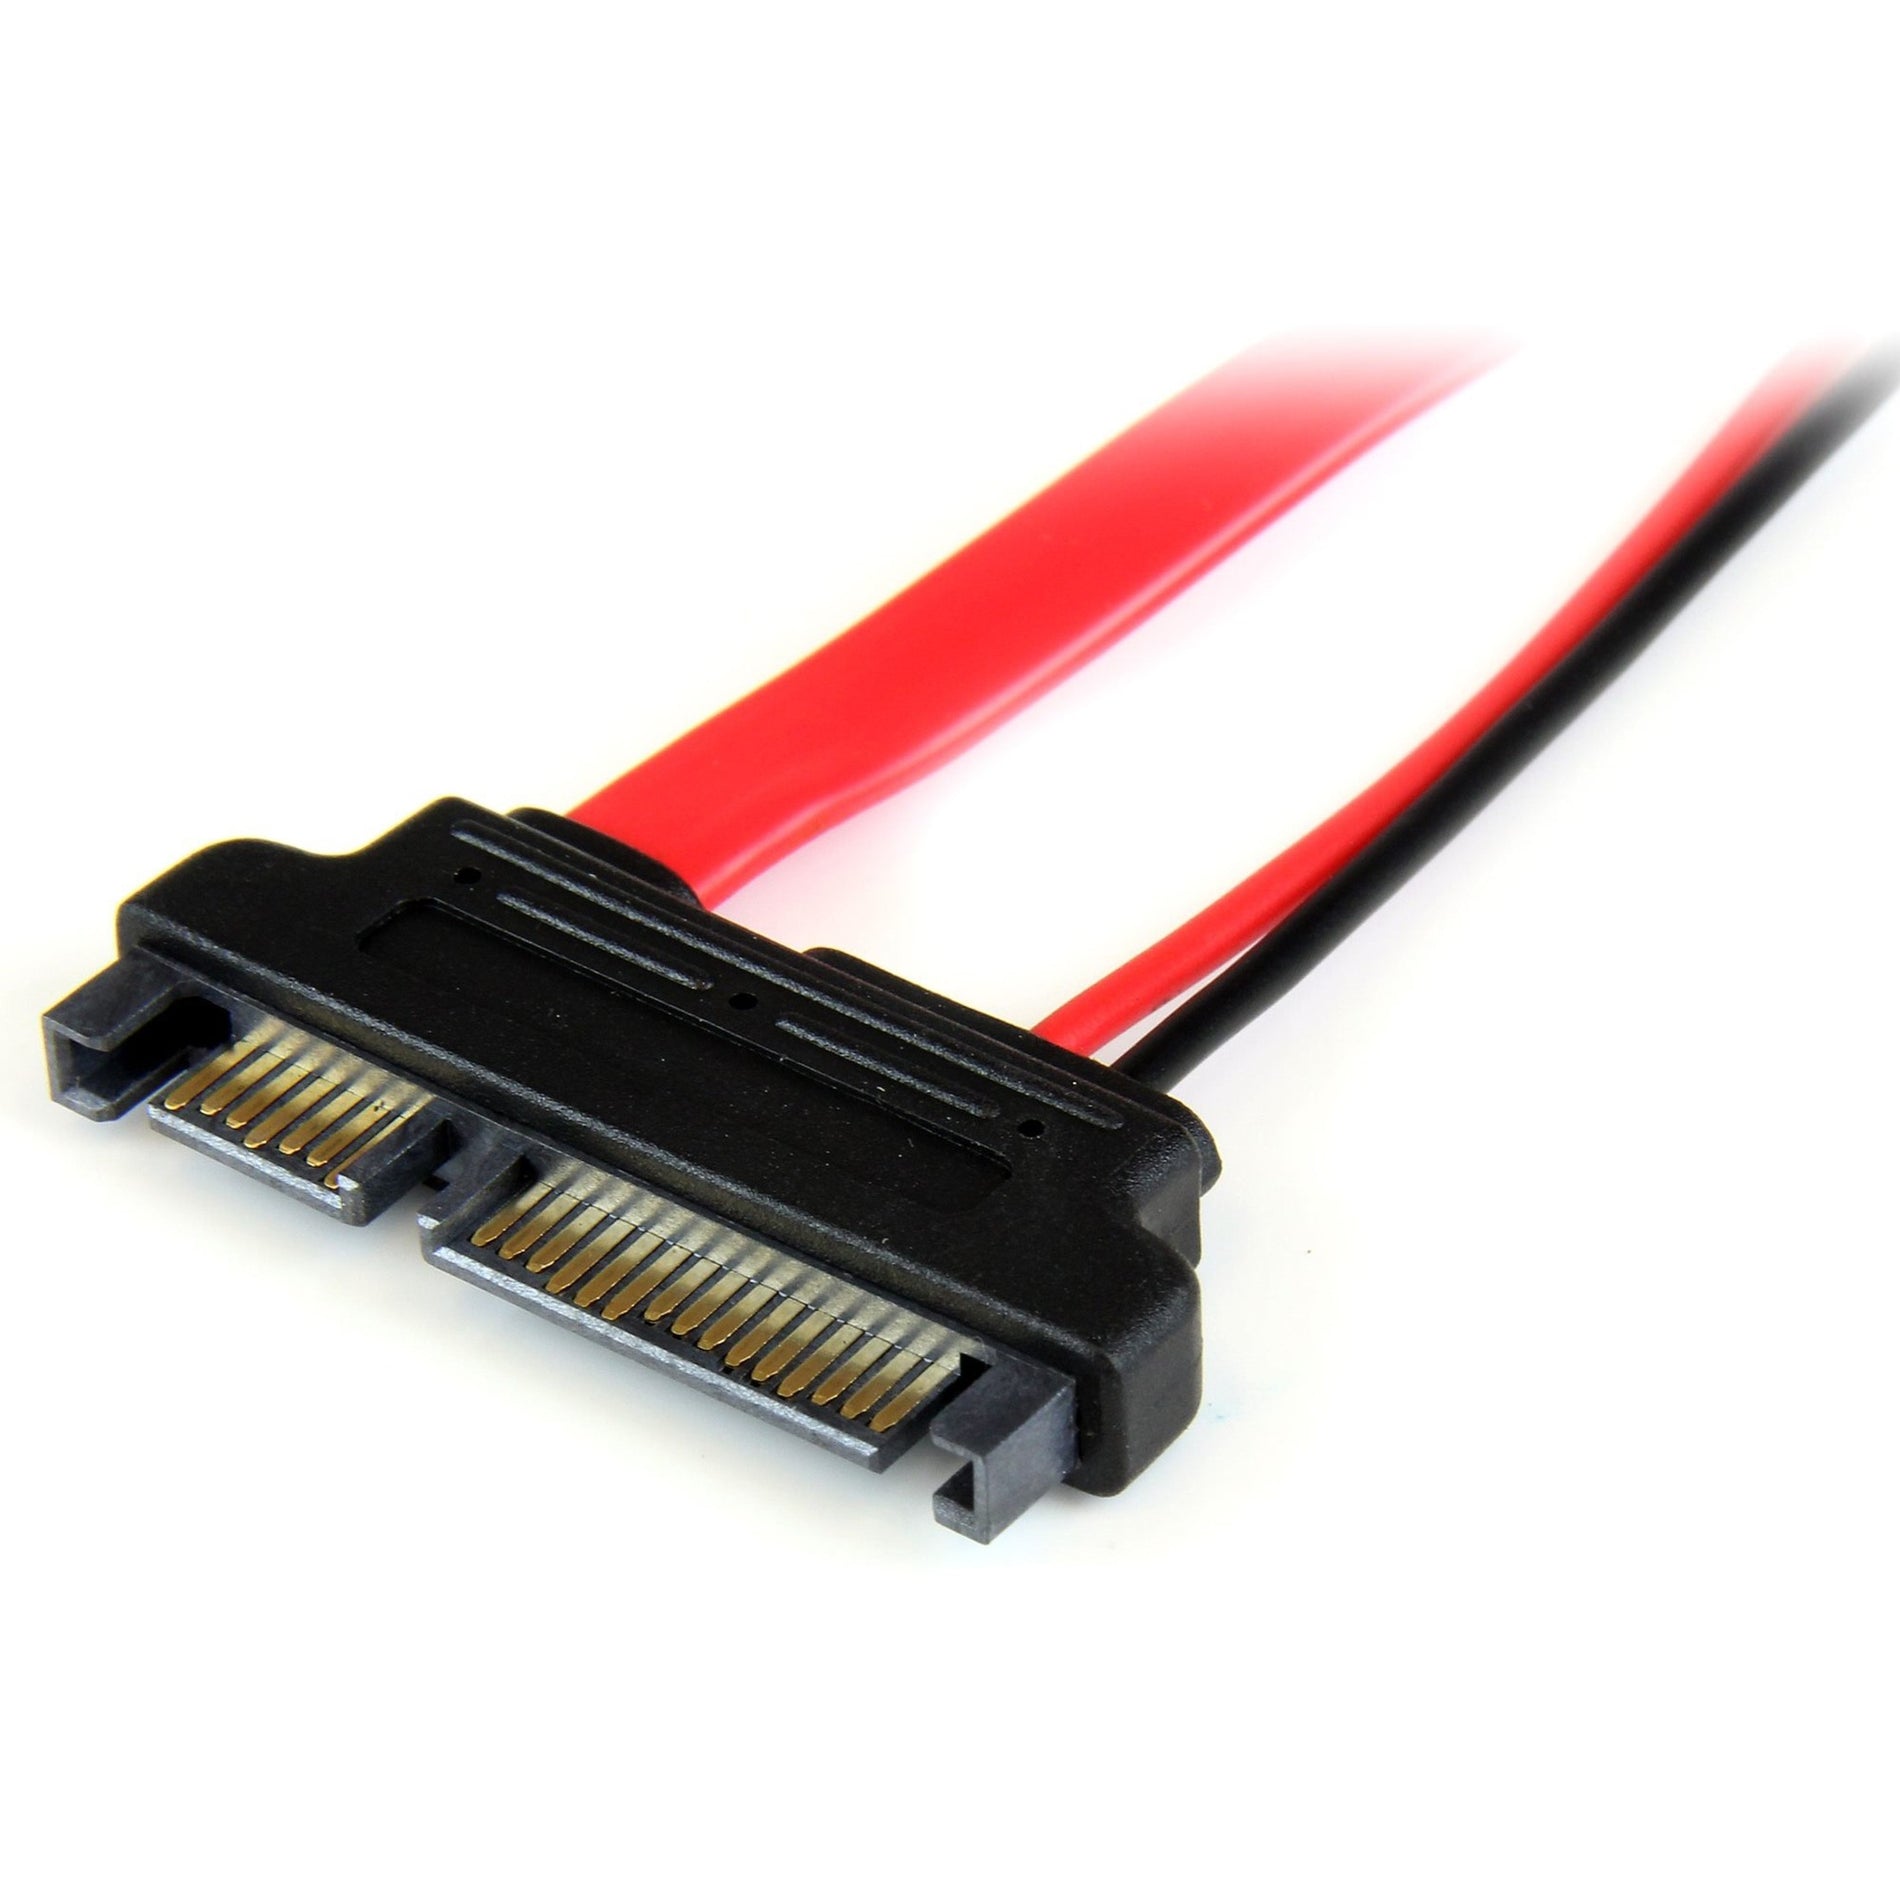 StarTech.com SLSATAADAP6 6in Slimline SATA to SATA Adapter with Power - F/M, Copper Conductor, 18 AWG, Red